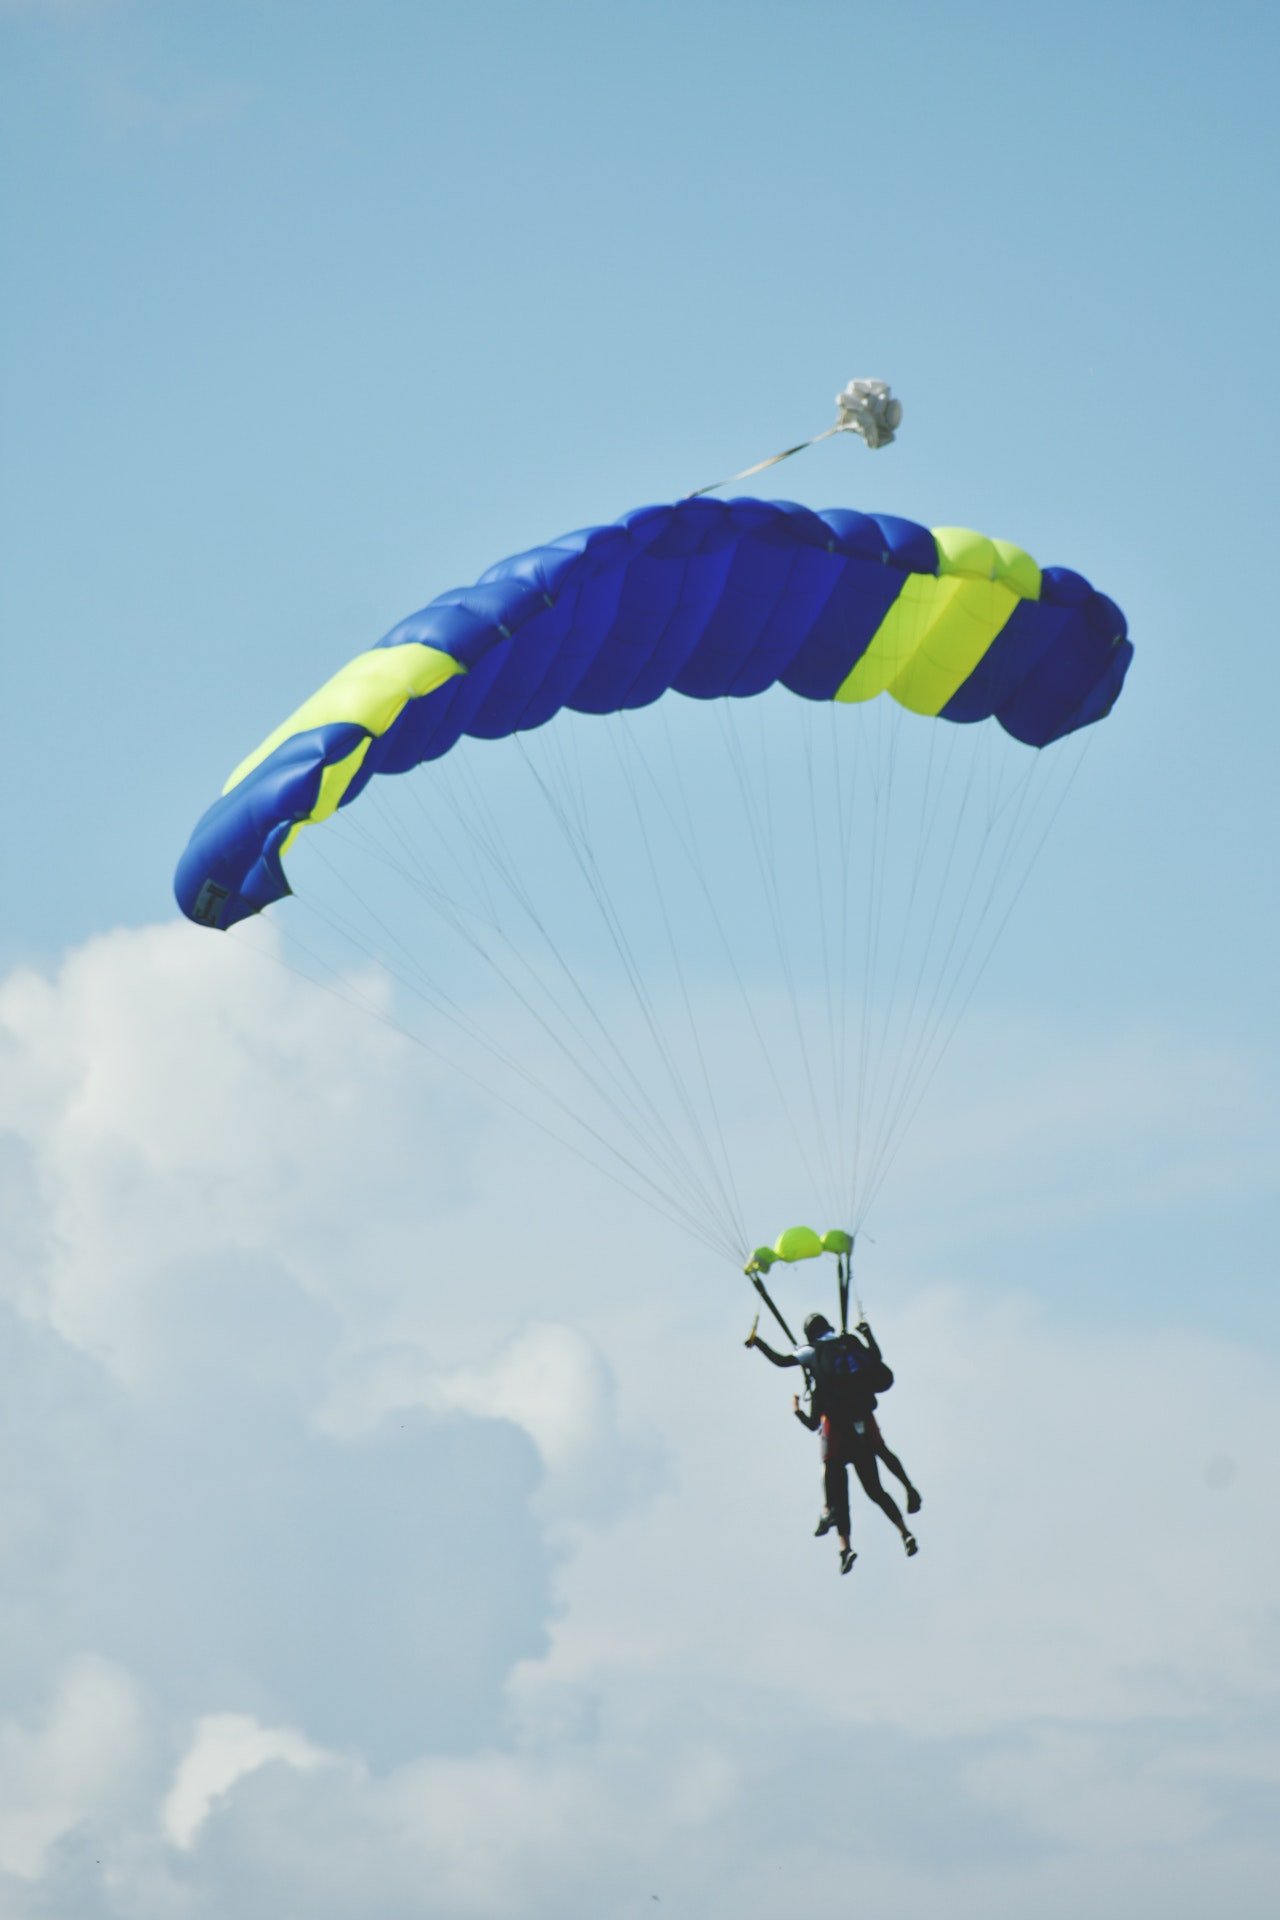 Photo of a man skydiving | Photo: Pexels